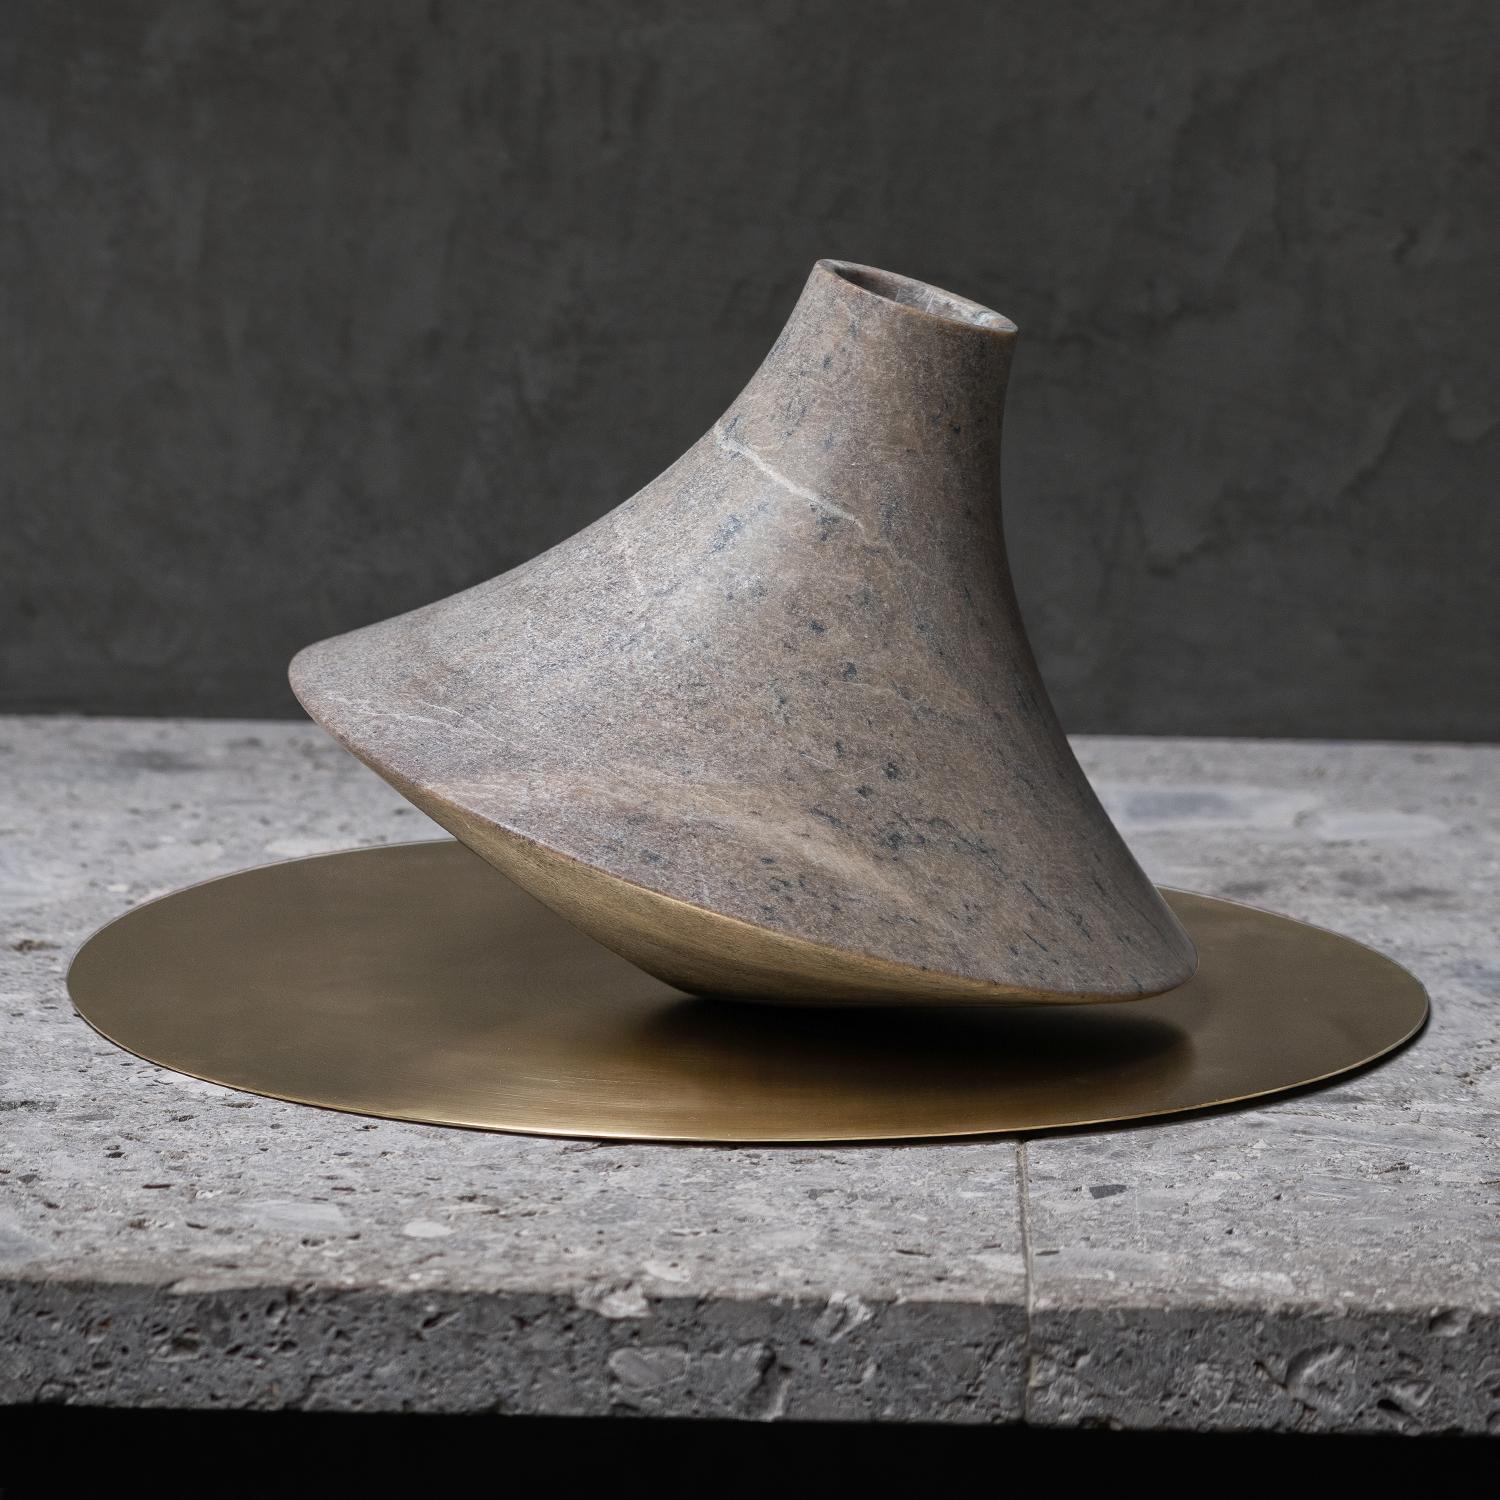 Vase Spectra A with all structure in polished
soastone and base in solid brass in brushed finish.
Vase: Diameter 25cm x Height 20cm.
Base: Diameter 36cm x Height 0,1cm.